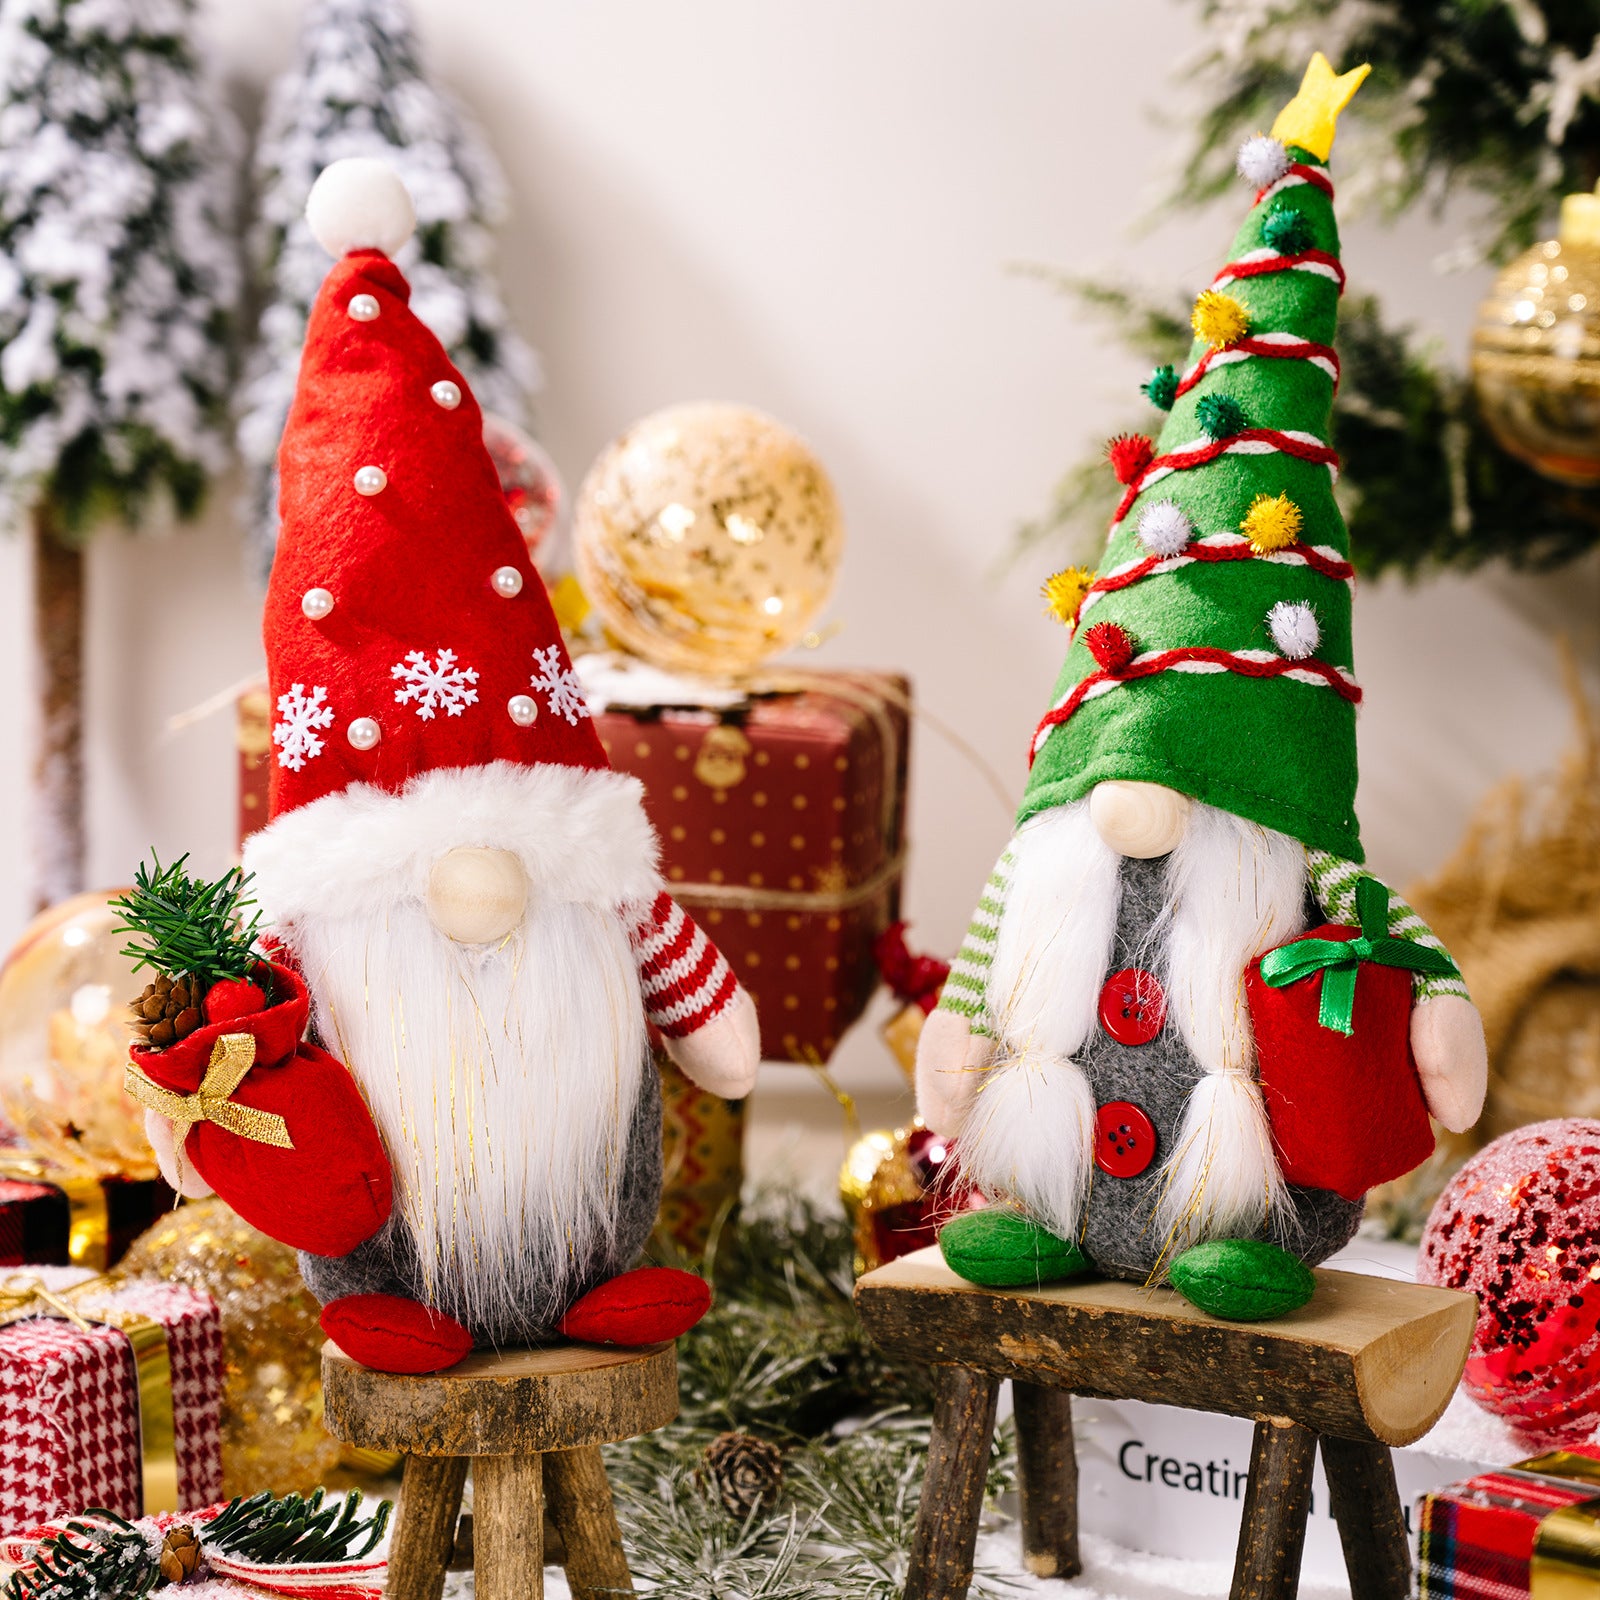 Christmas Is the Most Loveable Celebration For Americans and Christmas Decoration their Always the First Priority That's We Are Here With Christmas Decoration Gnomes, Xmas Gnomes, Santa Gnomes, DIY gnomes, Gnome Christmas Tree, Nordic gnomes, Tomato Cage Gnomes, Plush Gnomes.